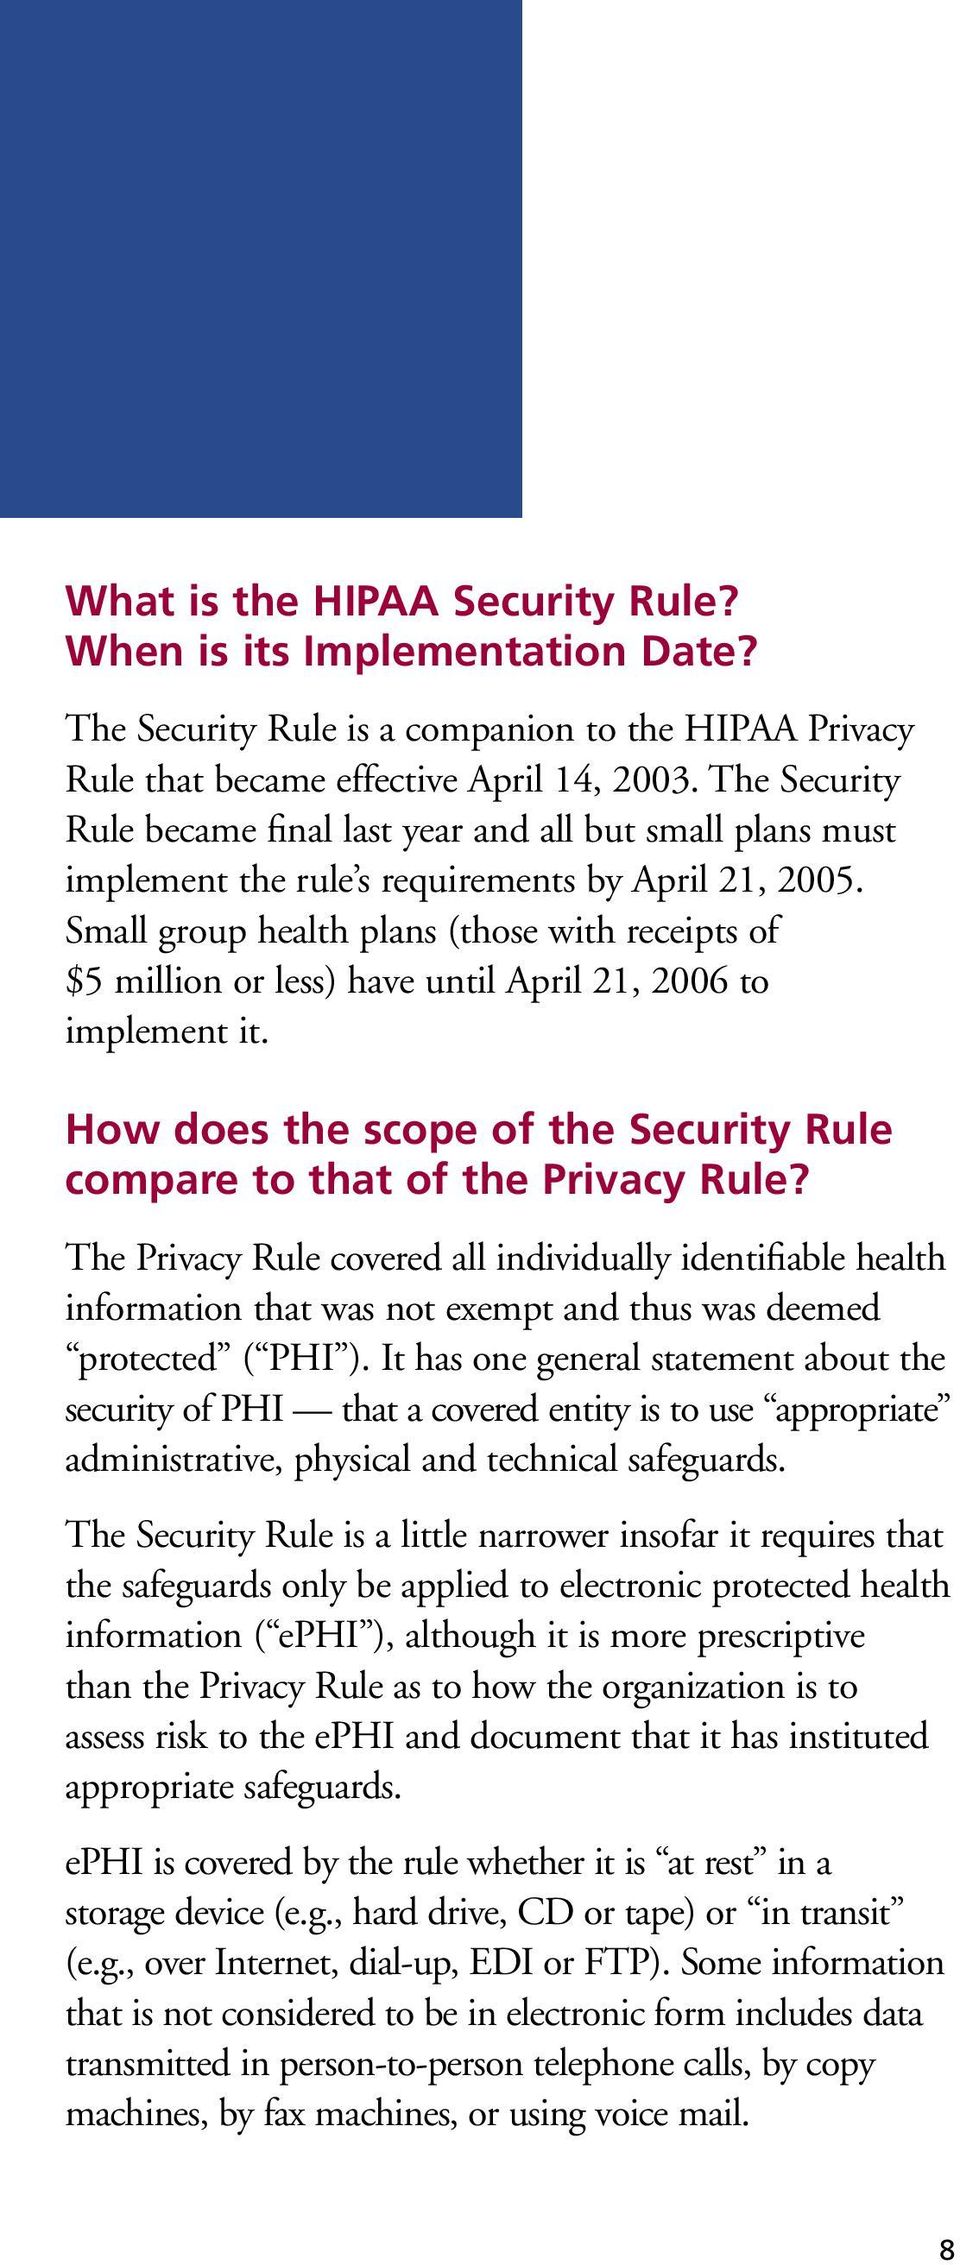 Small group health plans (those with receipts of $5 million or less) have until April 21, 2006 to implement it. How does the scope of the Security Rule compare to that of the Privacy Rule?